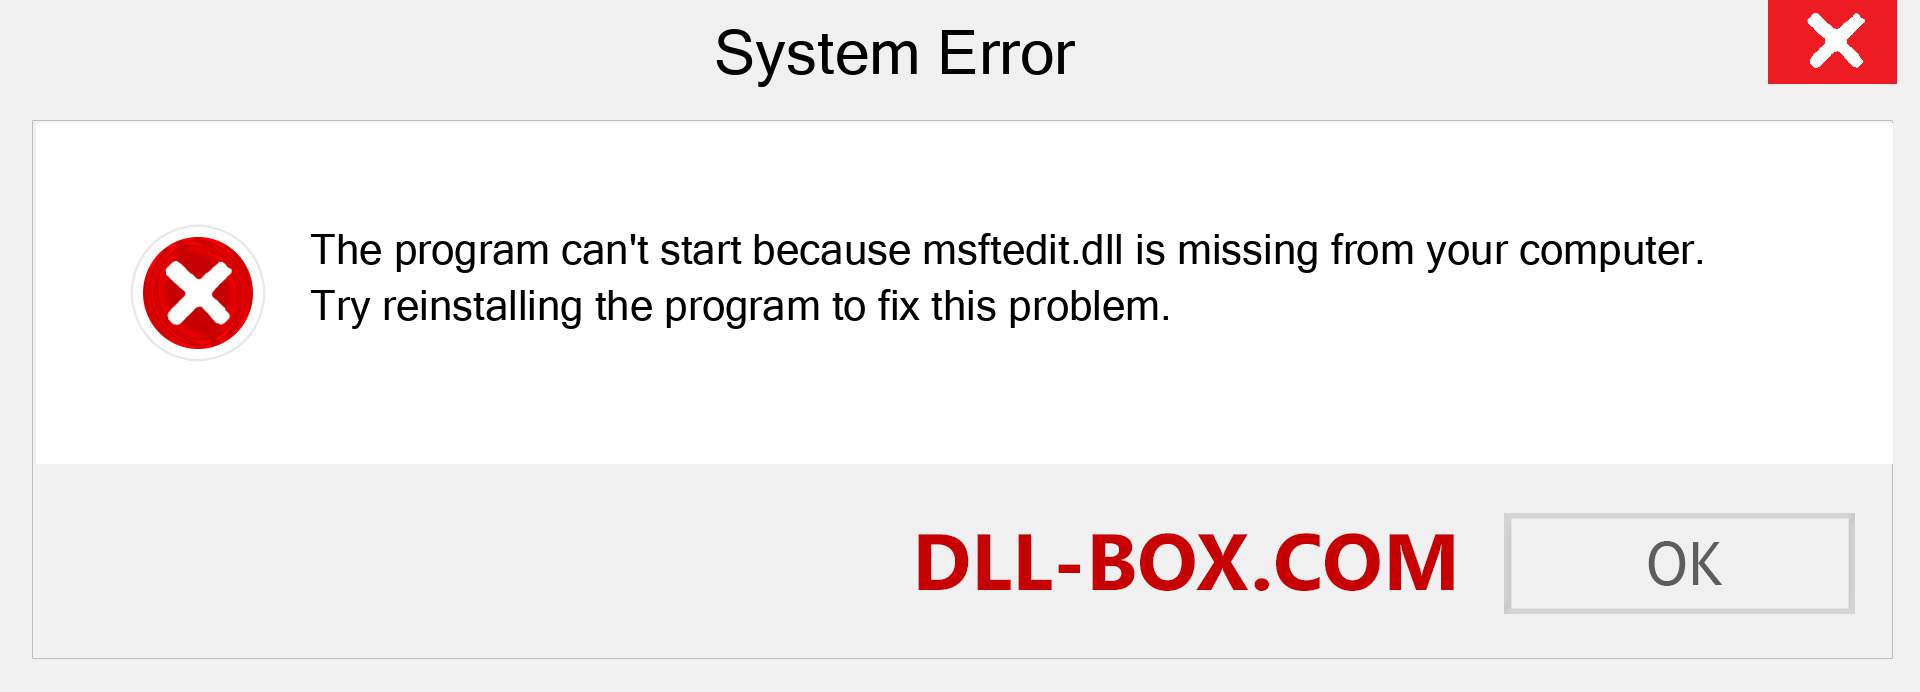  msftedit.dll file is missing?. Download for Windows 7, 8, 10 - Fix  msftedit dll Missing Error on Windows, photos, images